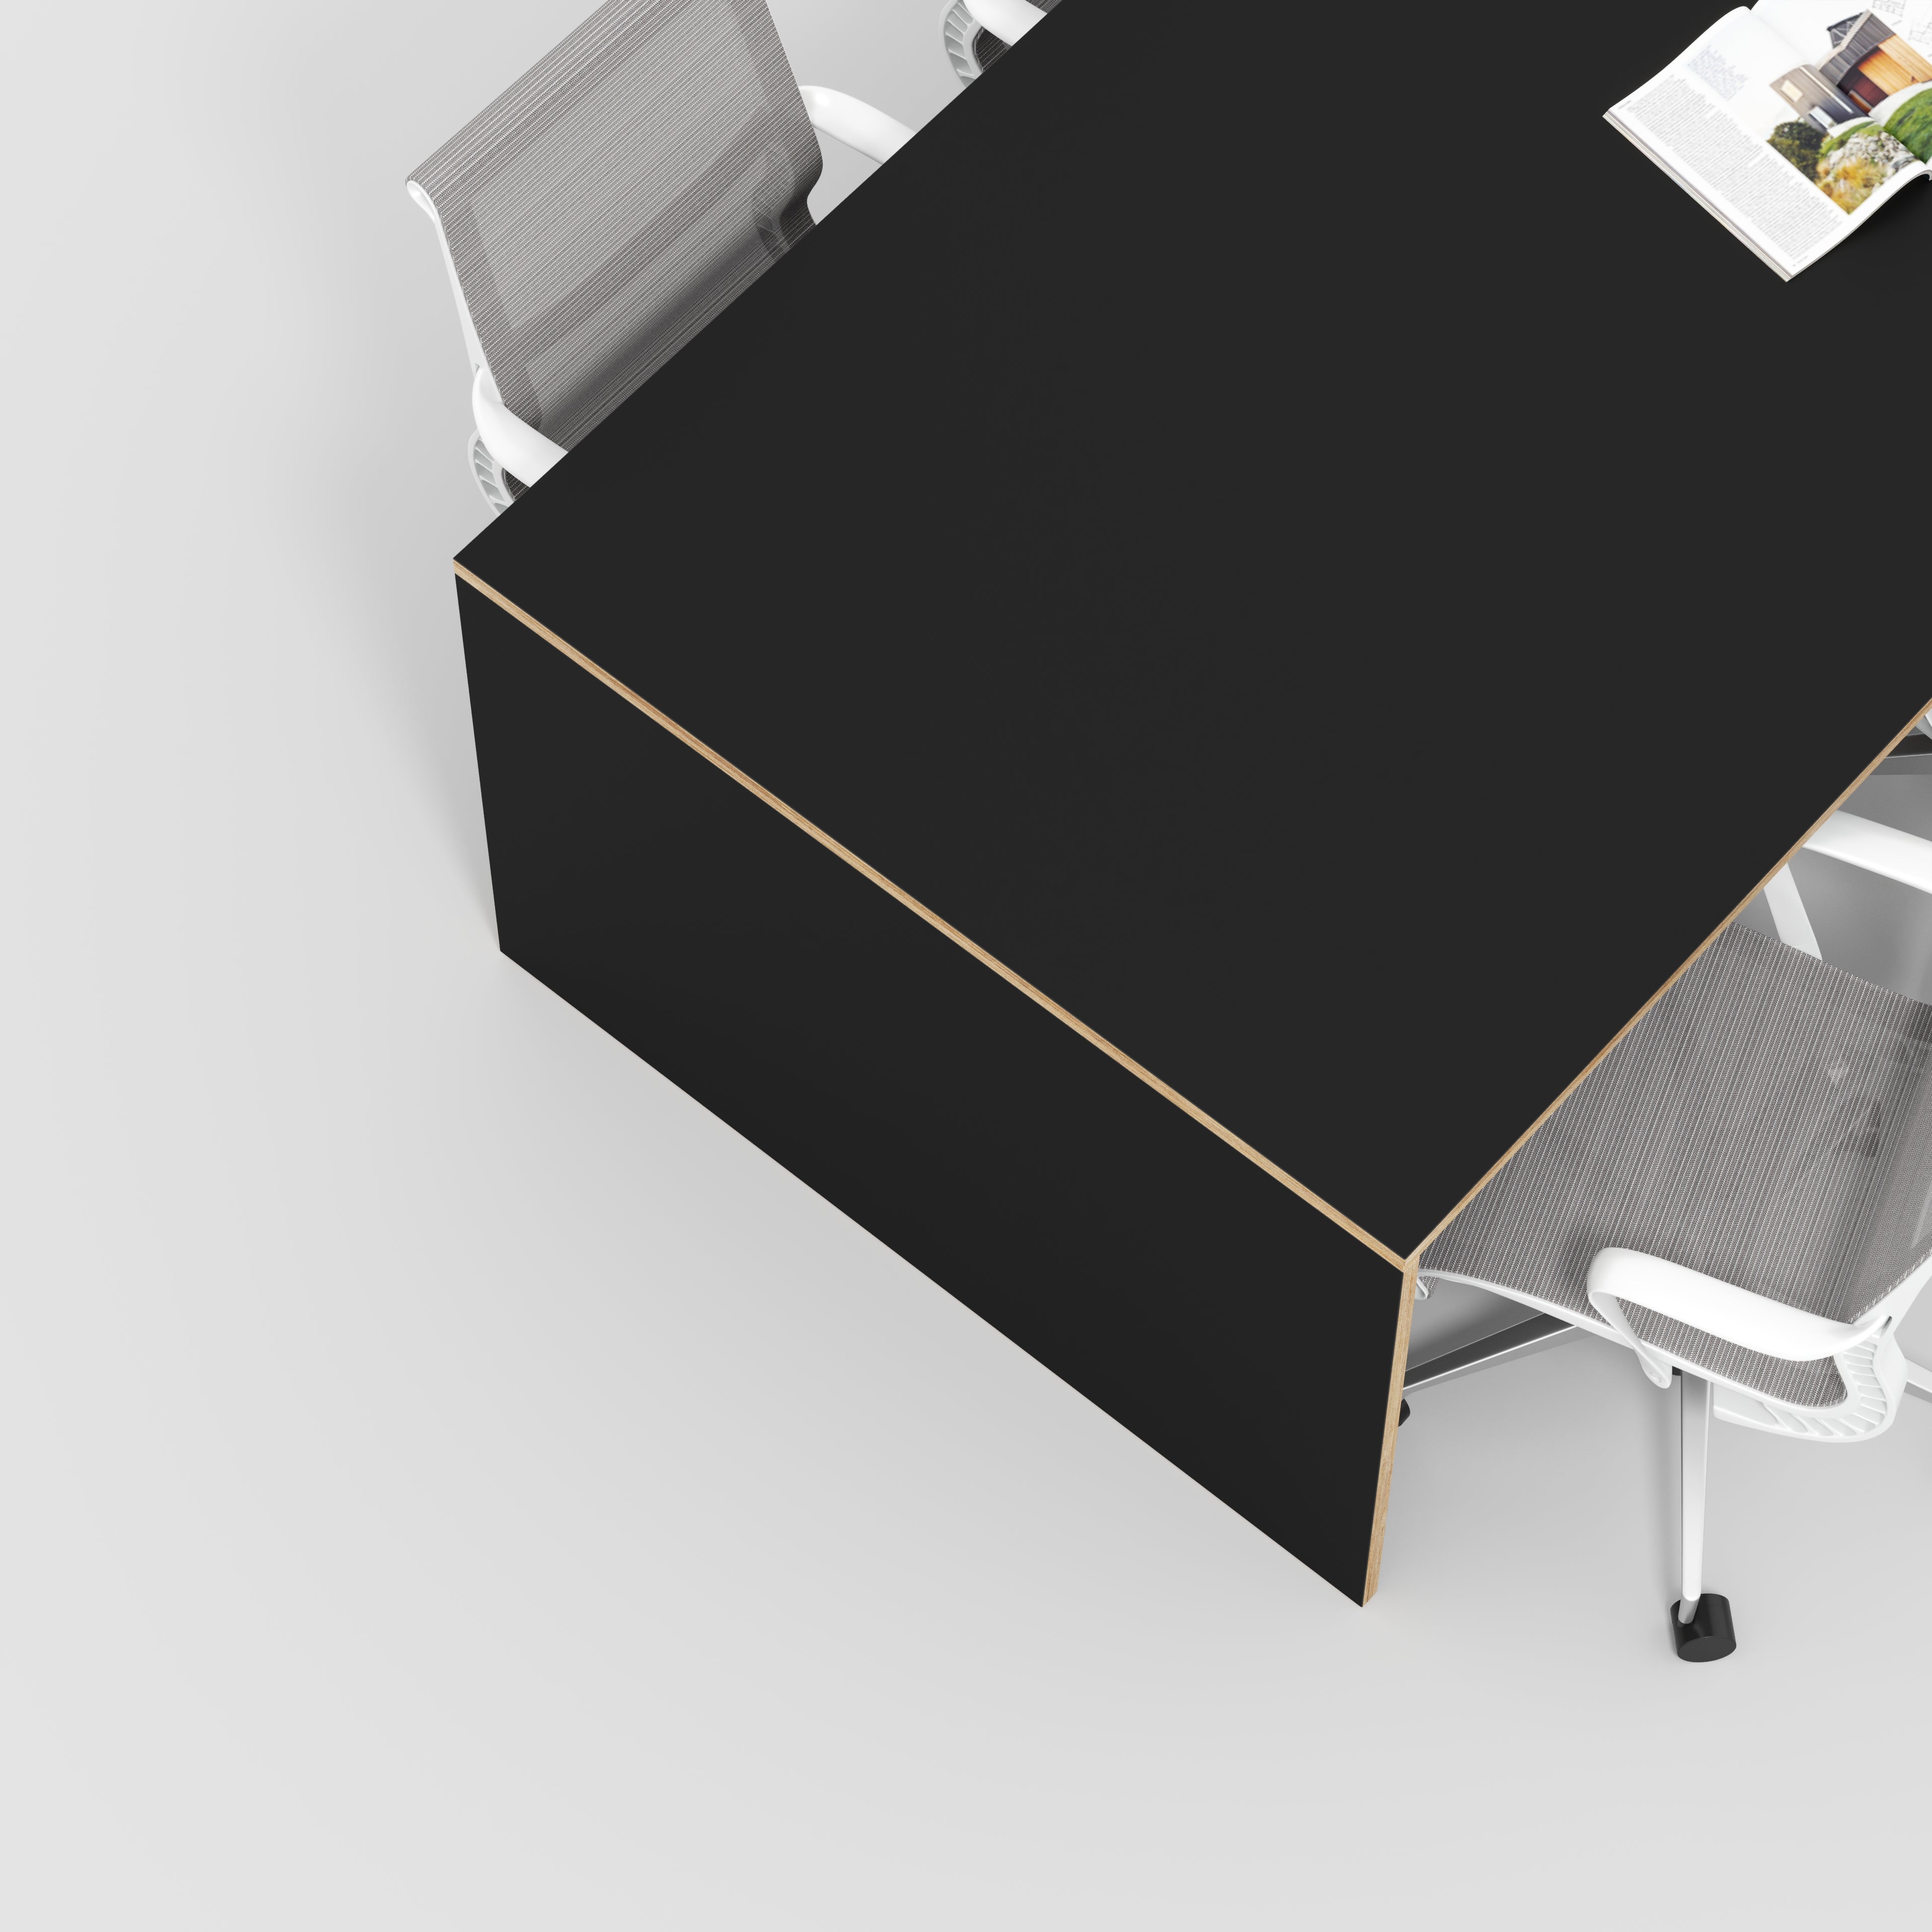 Table with Solid Sides - Formica Diamond Black - 5600(w) x 1000(d) x 750(h)